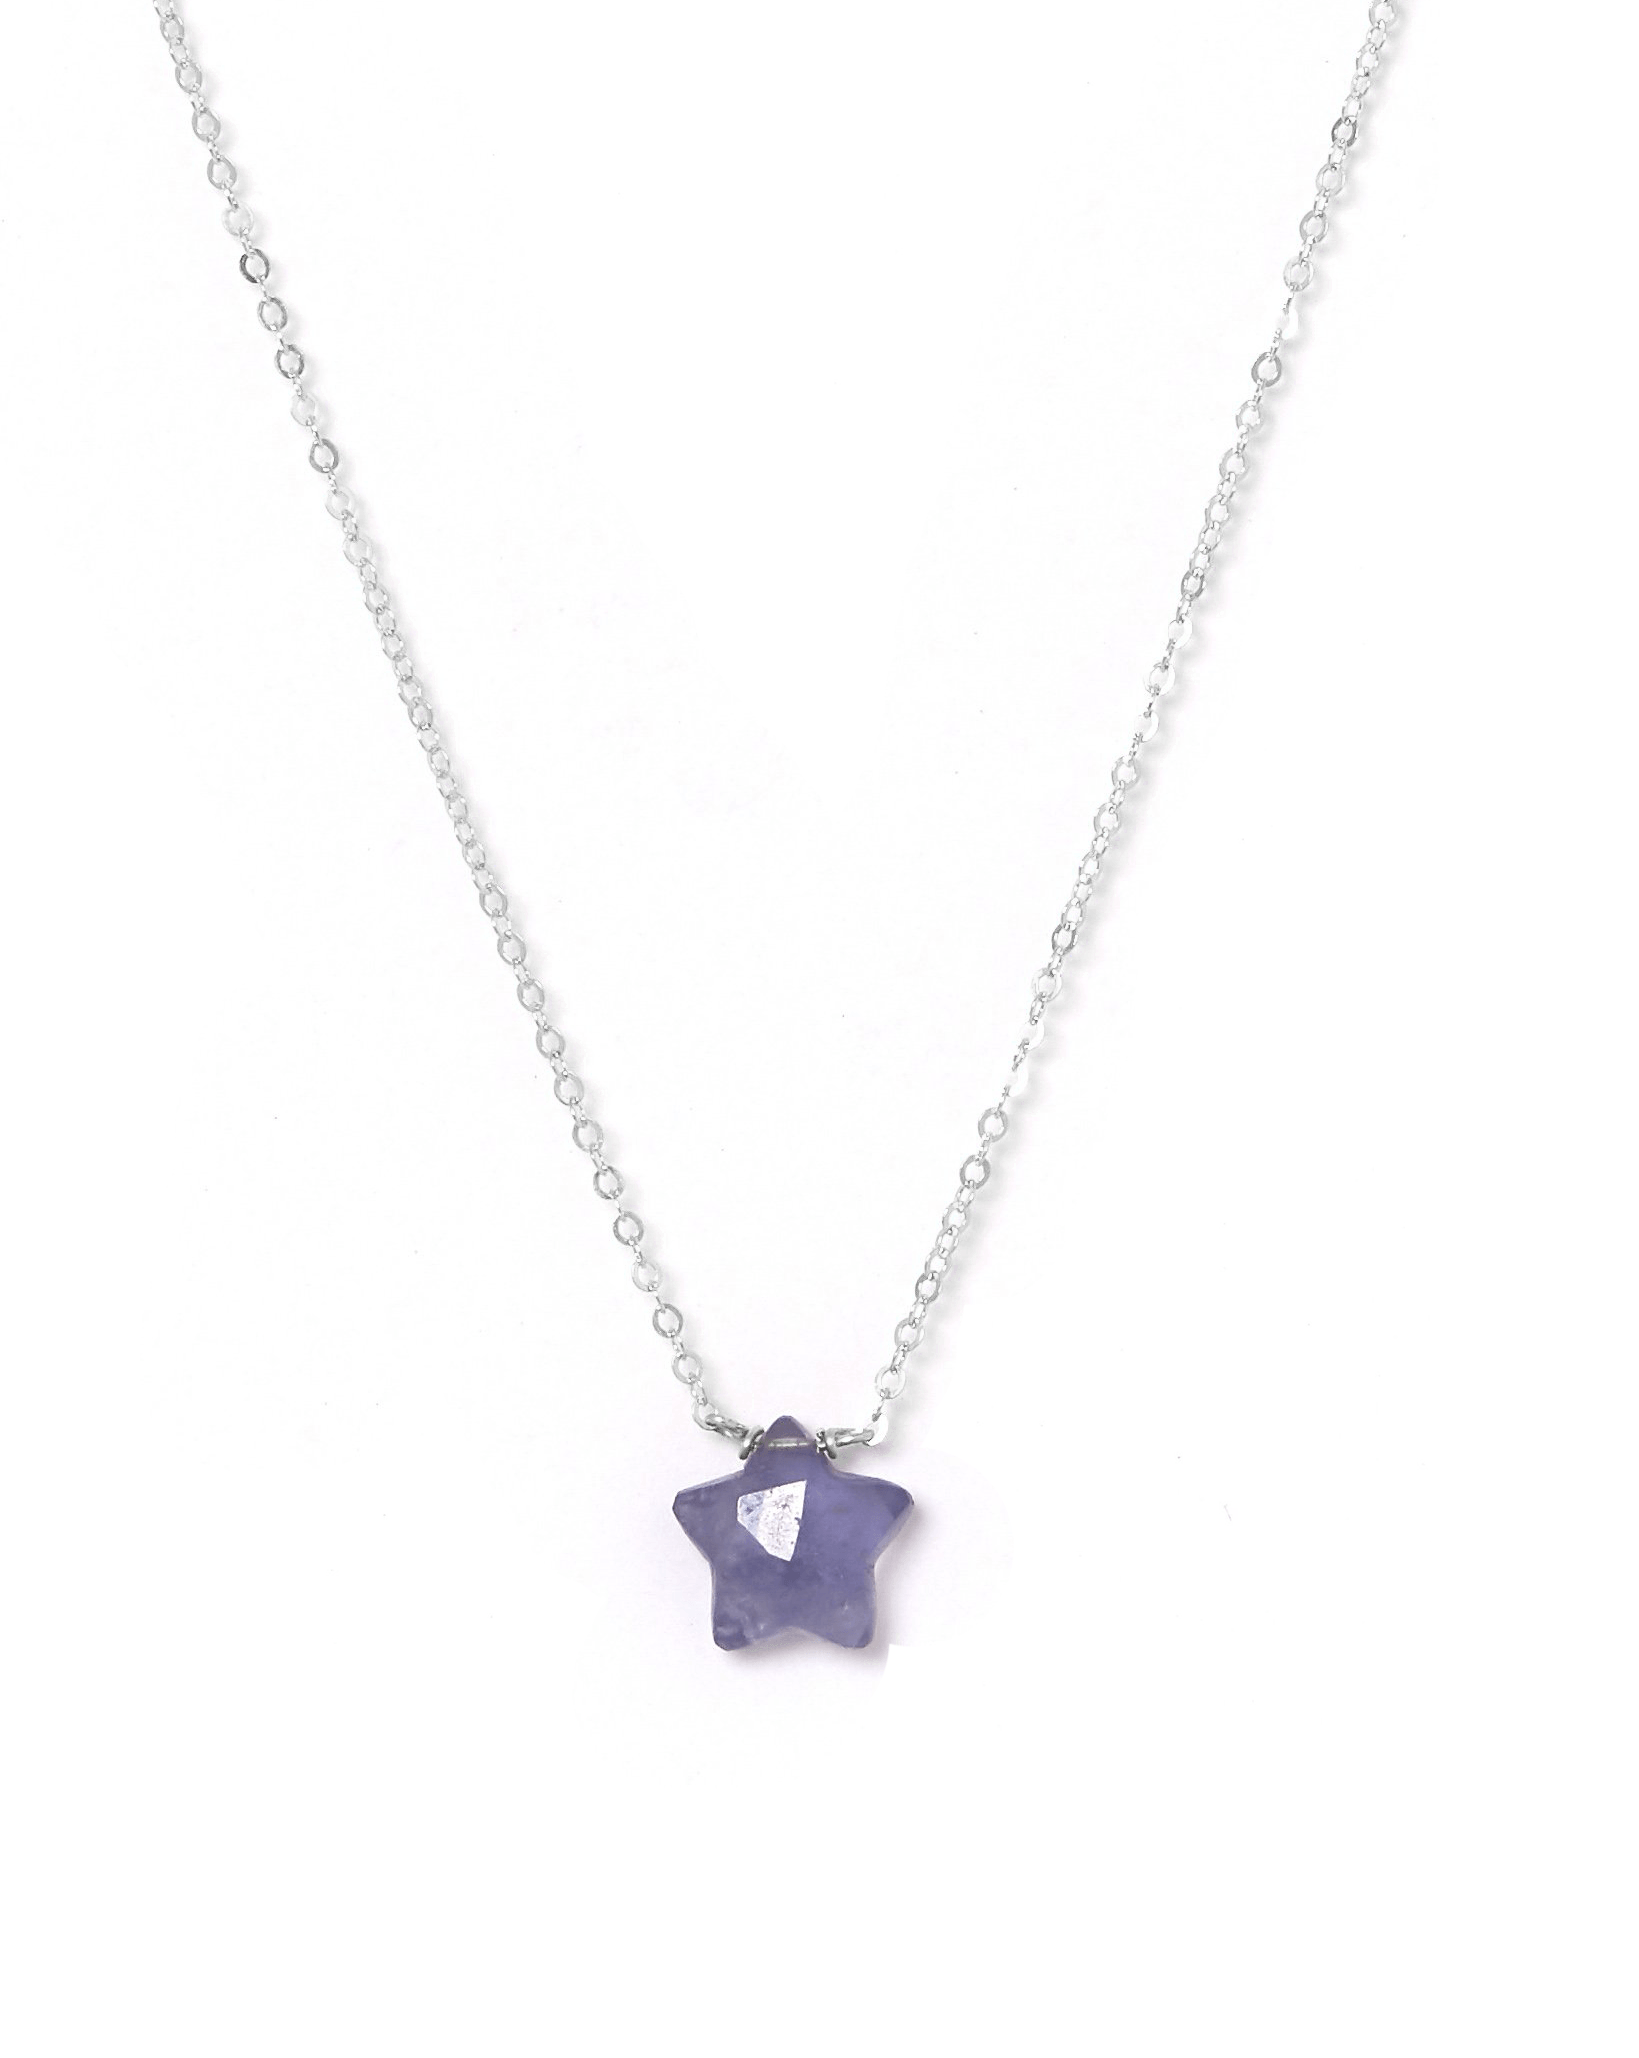 Star Necklace by KOZAKH. A 16 to 18 inch adjustable length necklace, crafted in Sterling Silver, featuring an Iolite star charm.